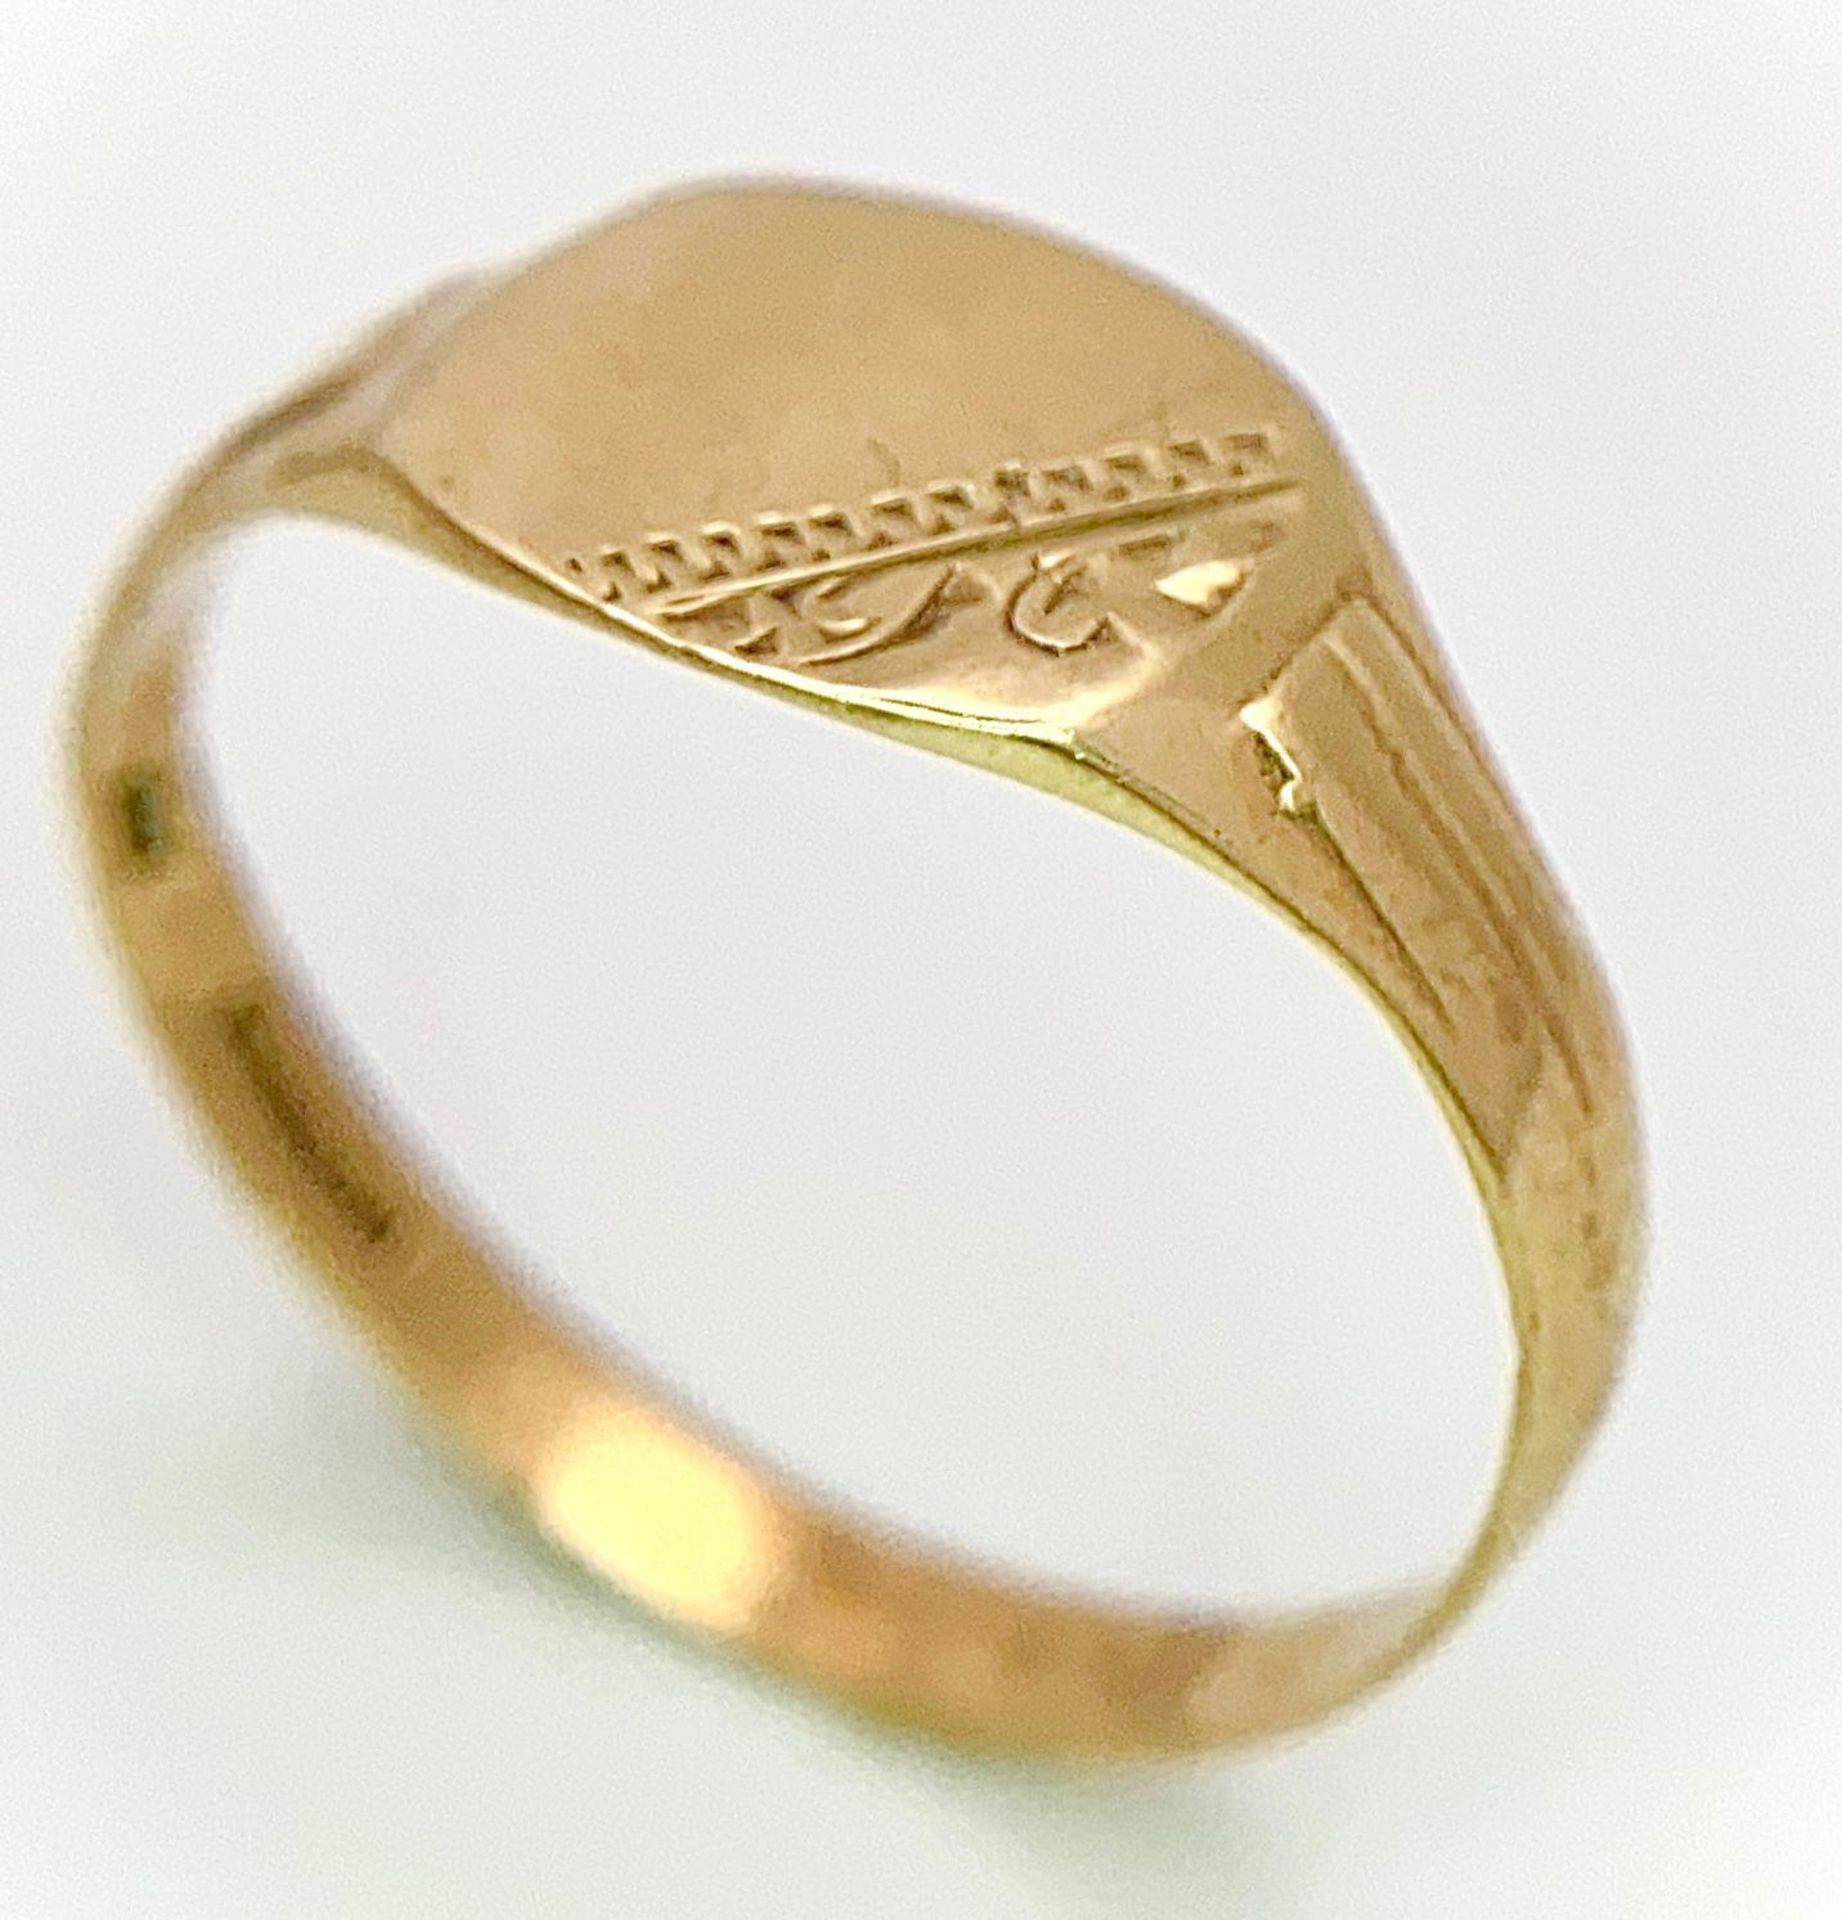 A Vintage 9K Yellow Gold Signet Ring. Size L. 1.3g weight. - Image 4 of 7